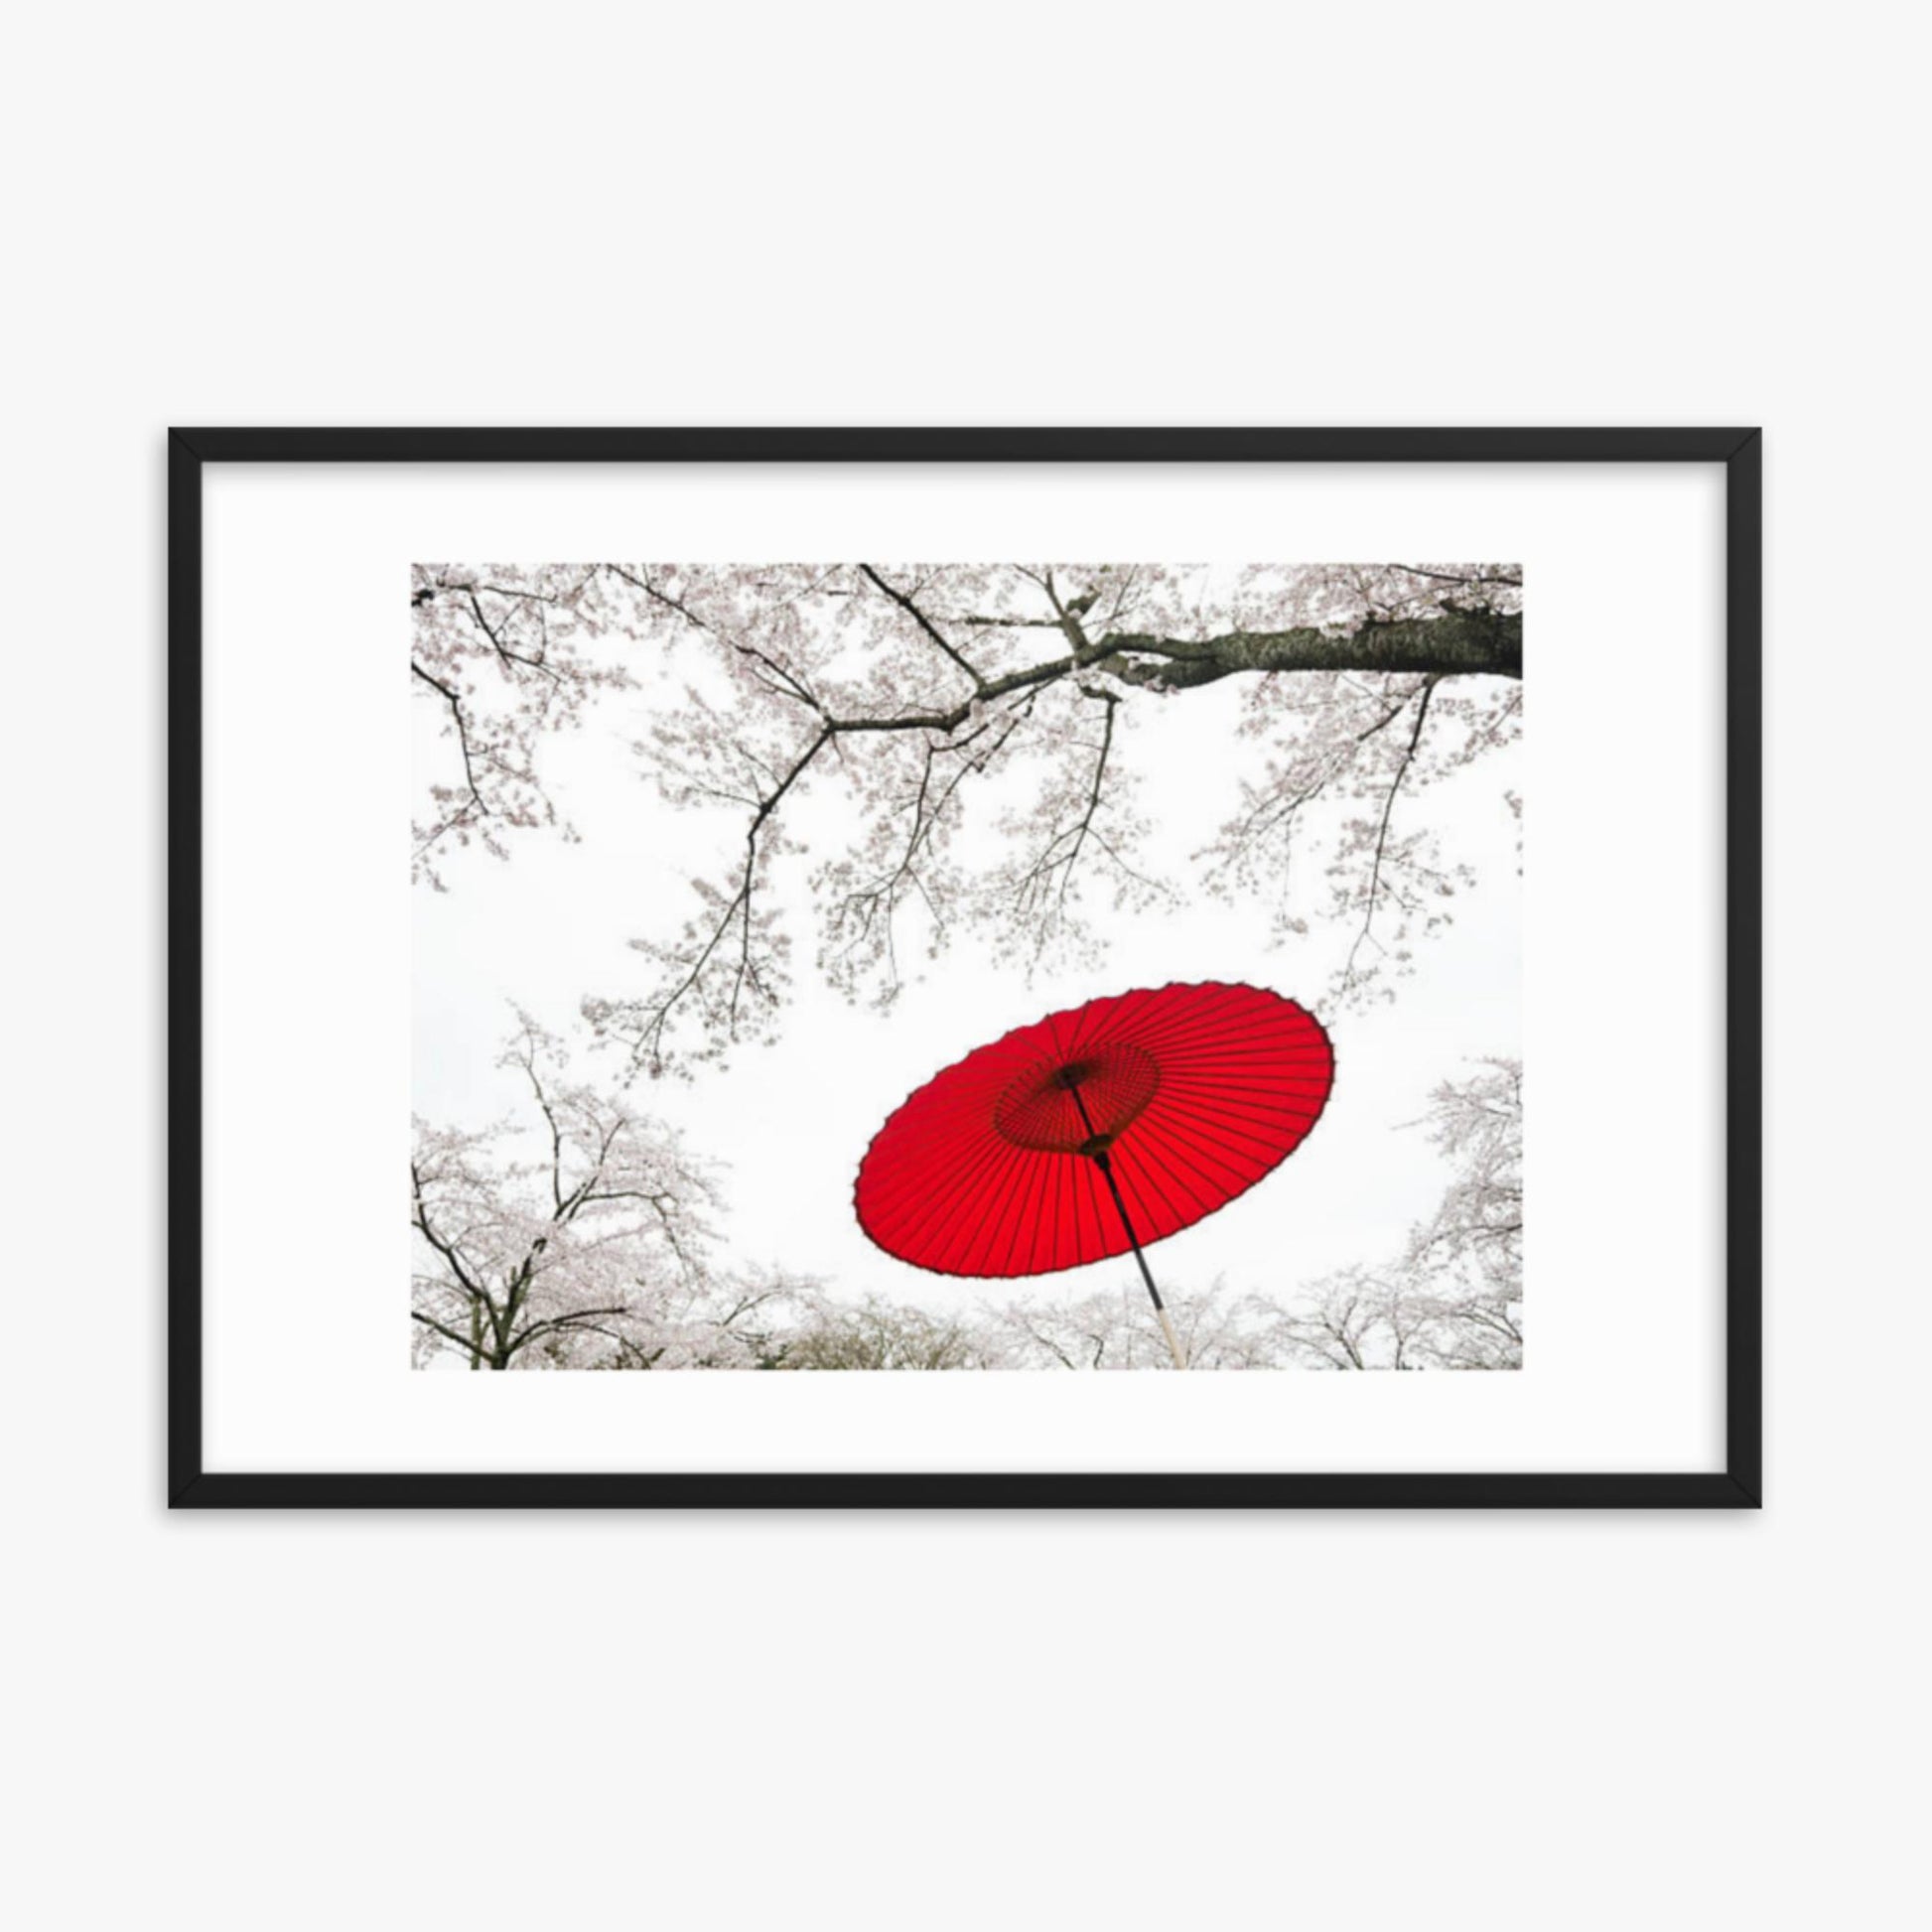 Japanese Umbrella 24x36 in Poster With Black Frame